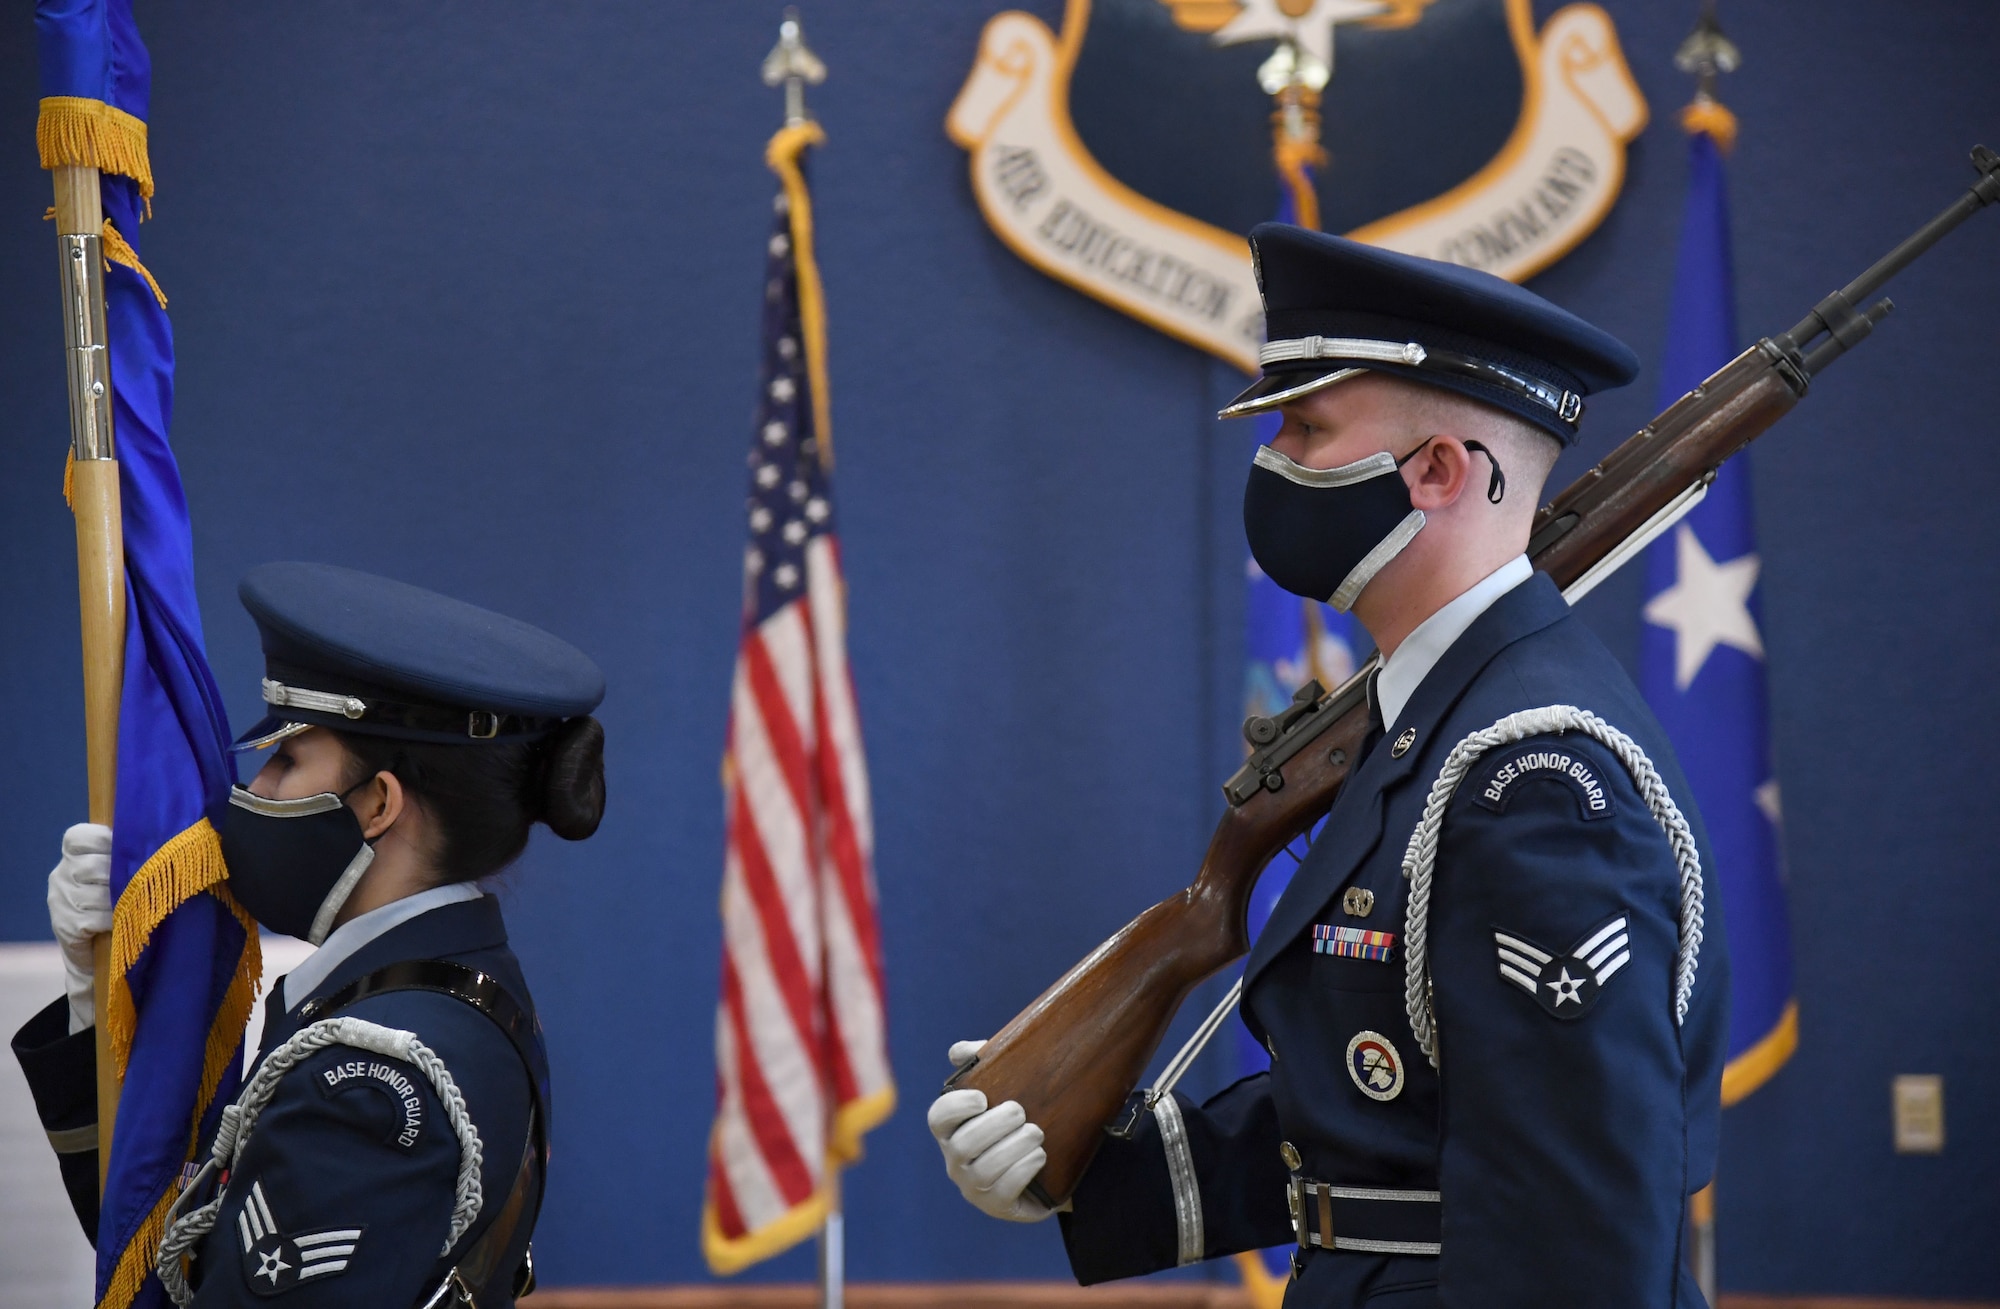 Keesler Honor Guard members present the colors during the Second Air Force change of command ceremony inside the Bay Breeze Event Center at Keesler Air Force Base, Mississippi, July 30, 2021. The ceremony is a symbol of command being exchanged from one commander to the next. Maj. Gen. Andrea Tullos relinquished command of the Second Air Force to Maj. Gen. Michele Edmondson. (U.S. Air Force photo by Kemberly Groue)